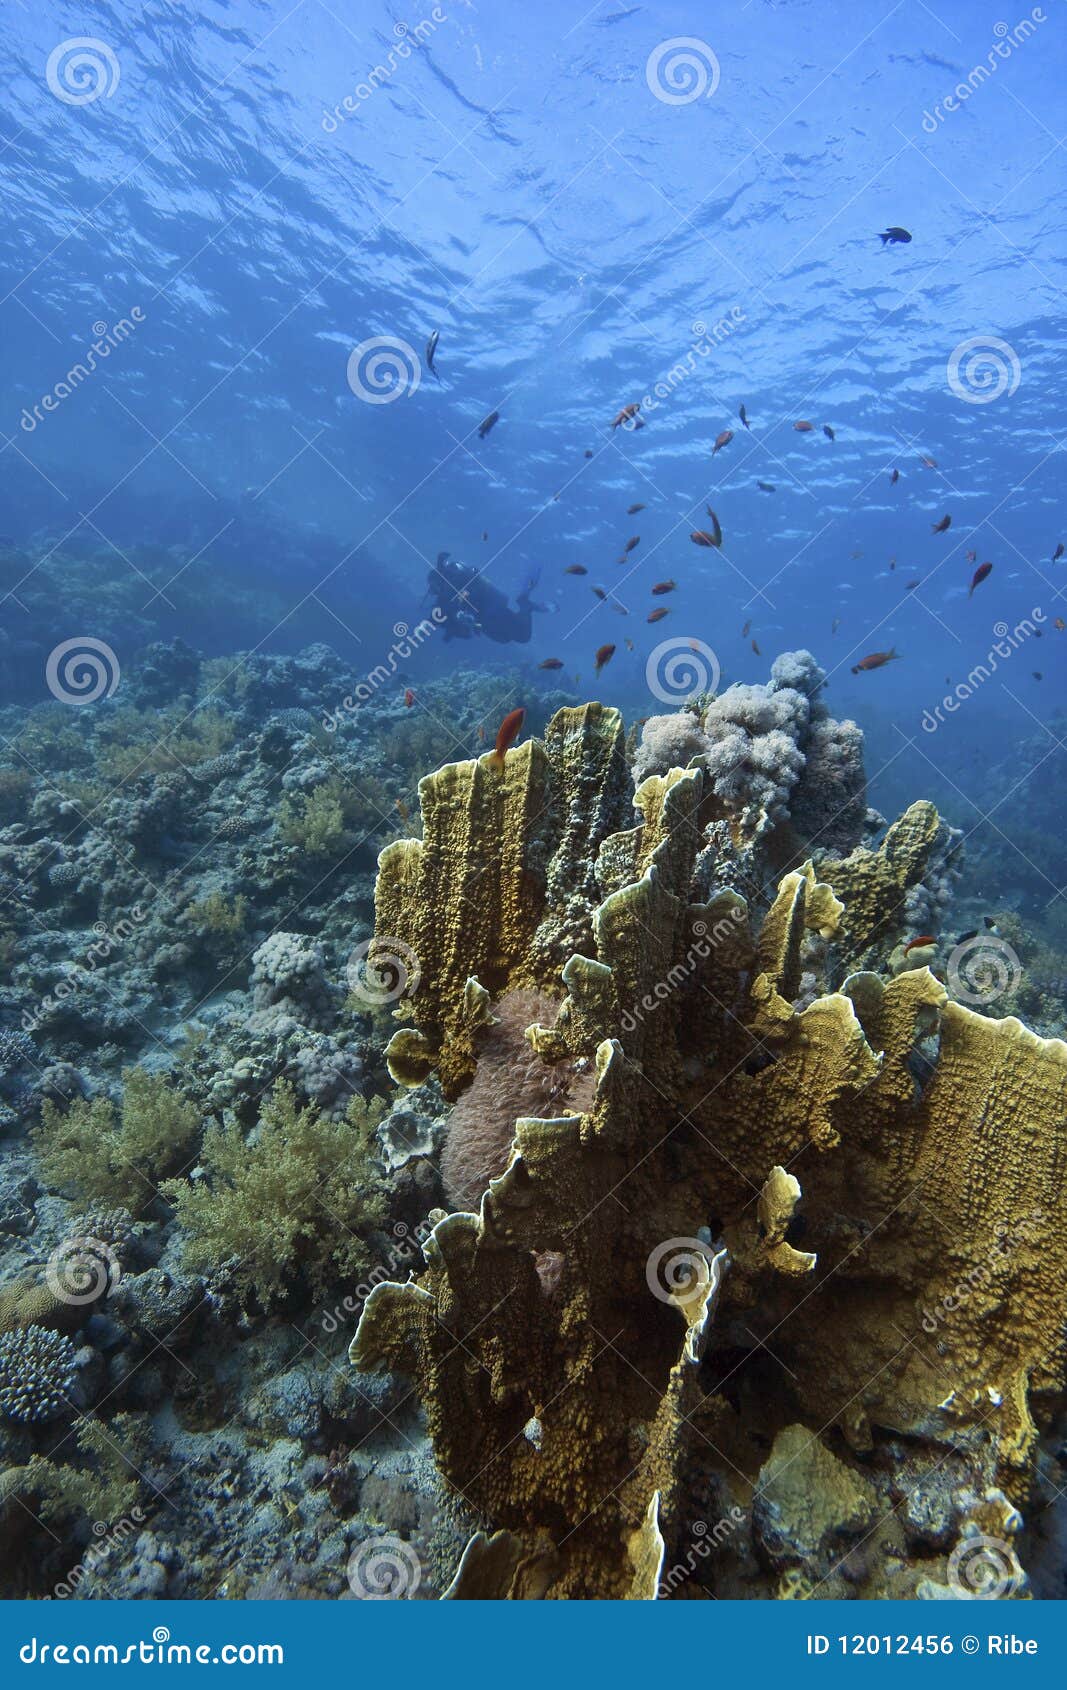 deep doral-reef with fish